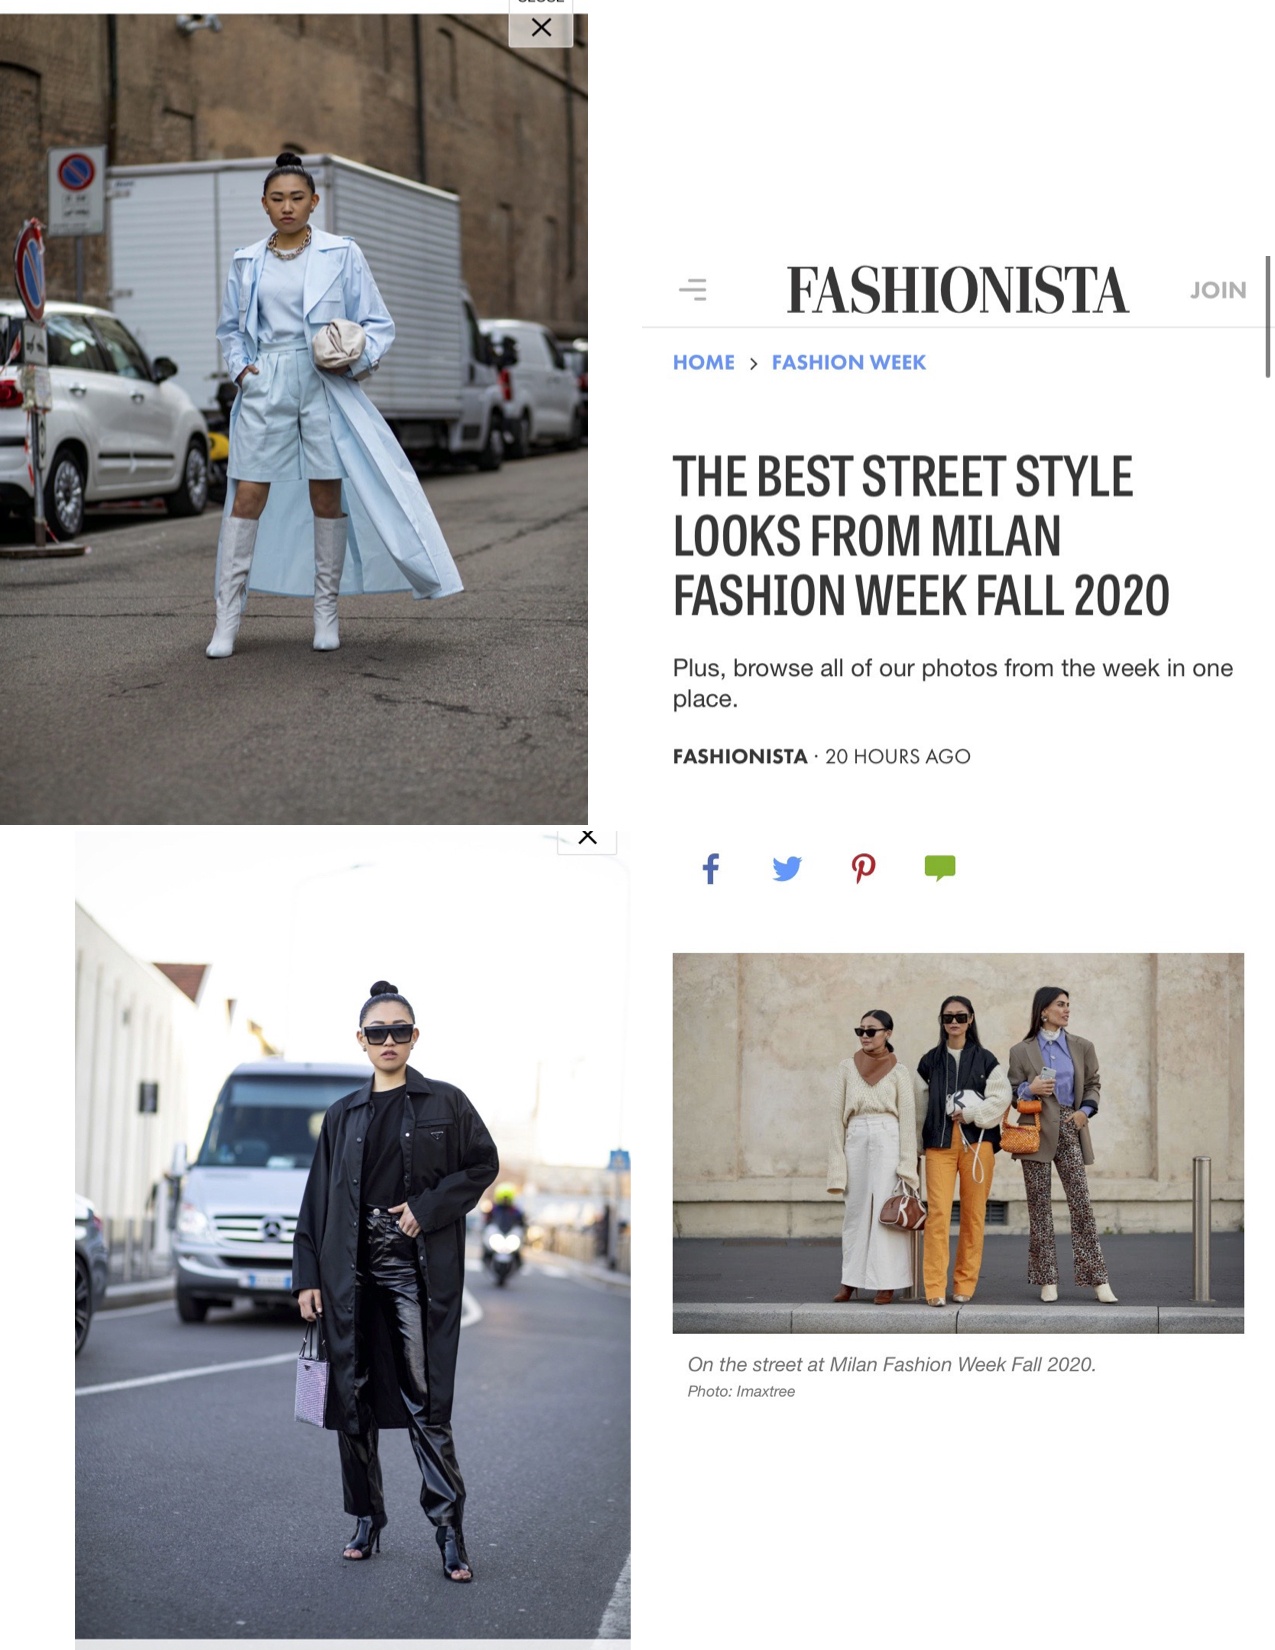 Fashionista: The Best Street Style Looks From Milan Fashion Week Fall 2020